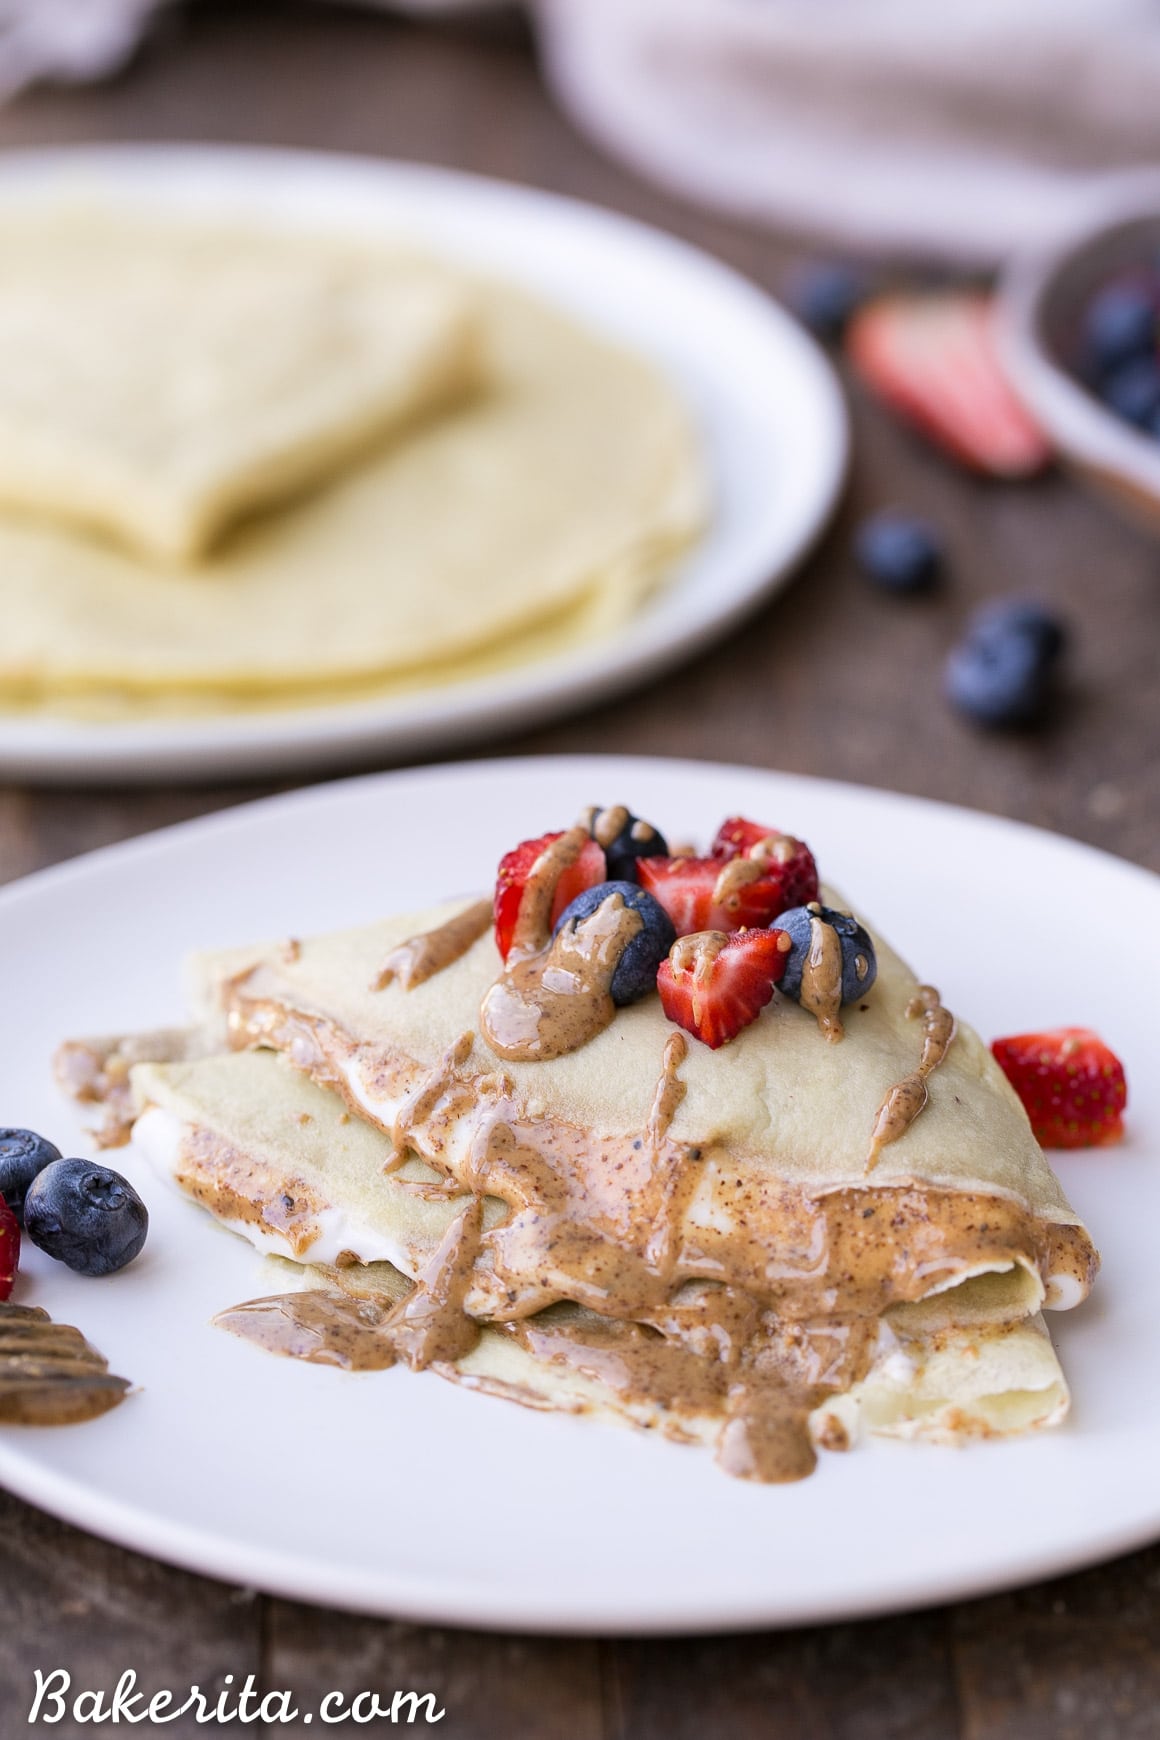 These Paleo Crepes can make any meal taste decadent, but they're made with healthy, clean ingredients. The batter is made in the blender in just a few minutes and they only take a minute or two to cook. You can fill them with any sweet or savory fillings you can think of! The possibilities are endless...